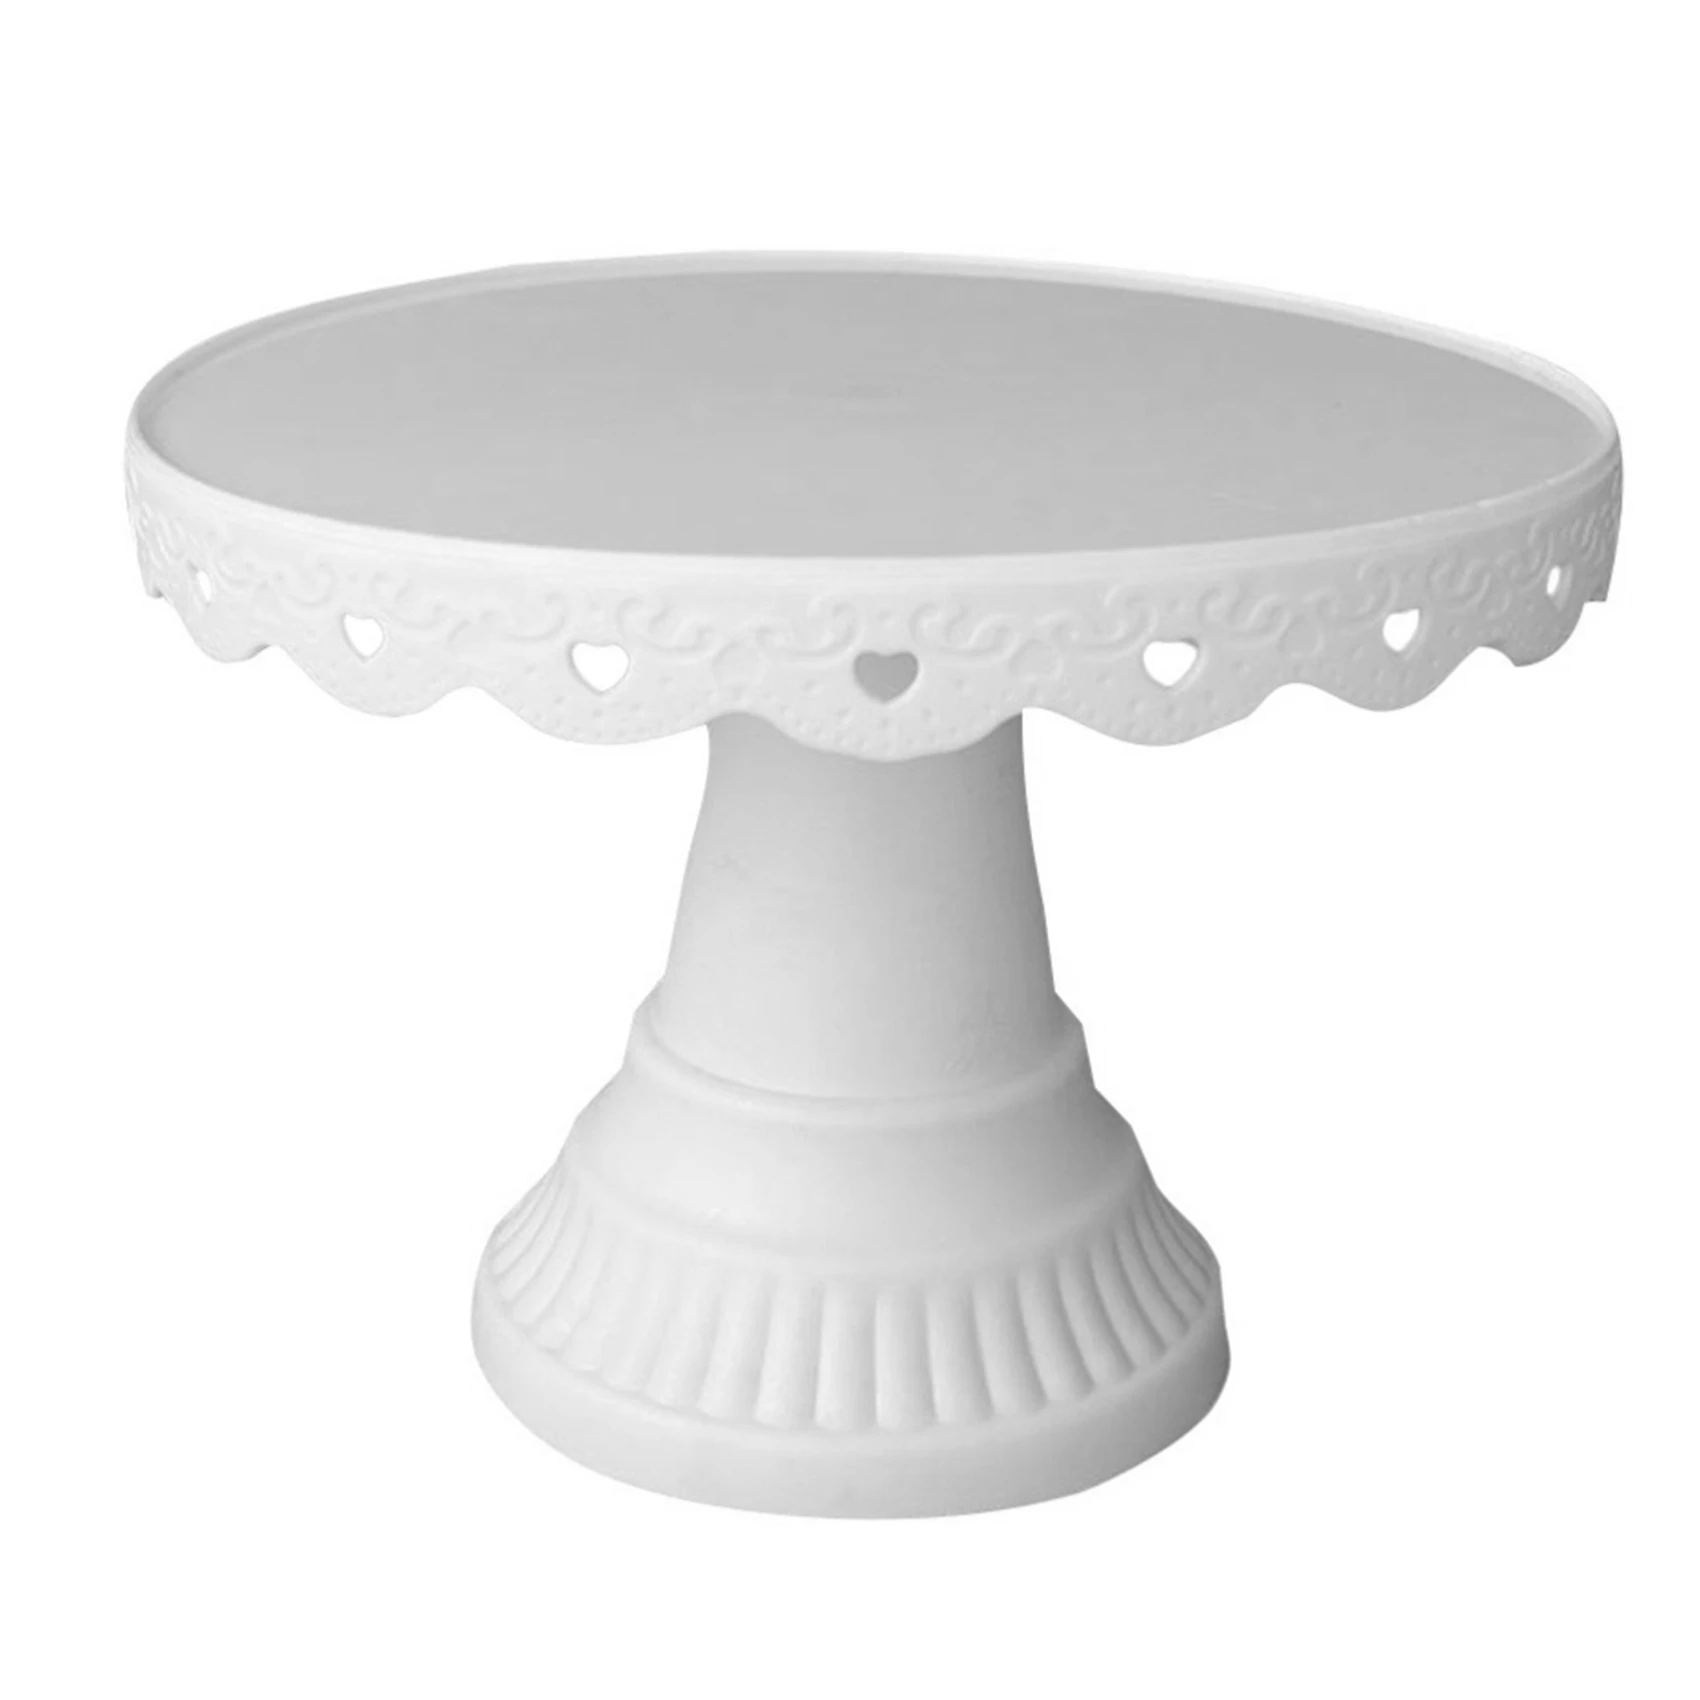 

Cake Stands Cupcake Holder Dessert Display Plate Tray Serving Platter for Party Wedding Party Birthday Celebration